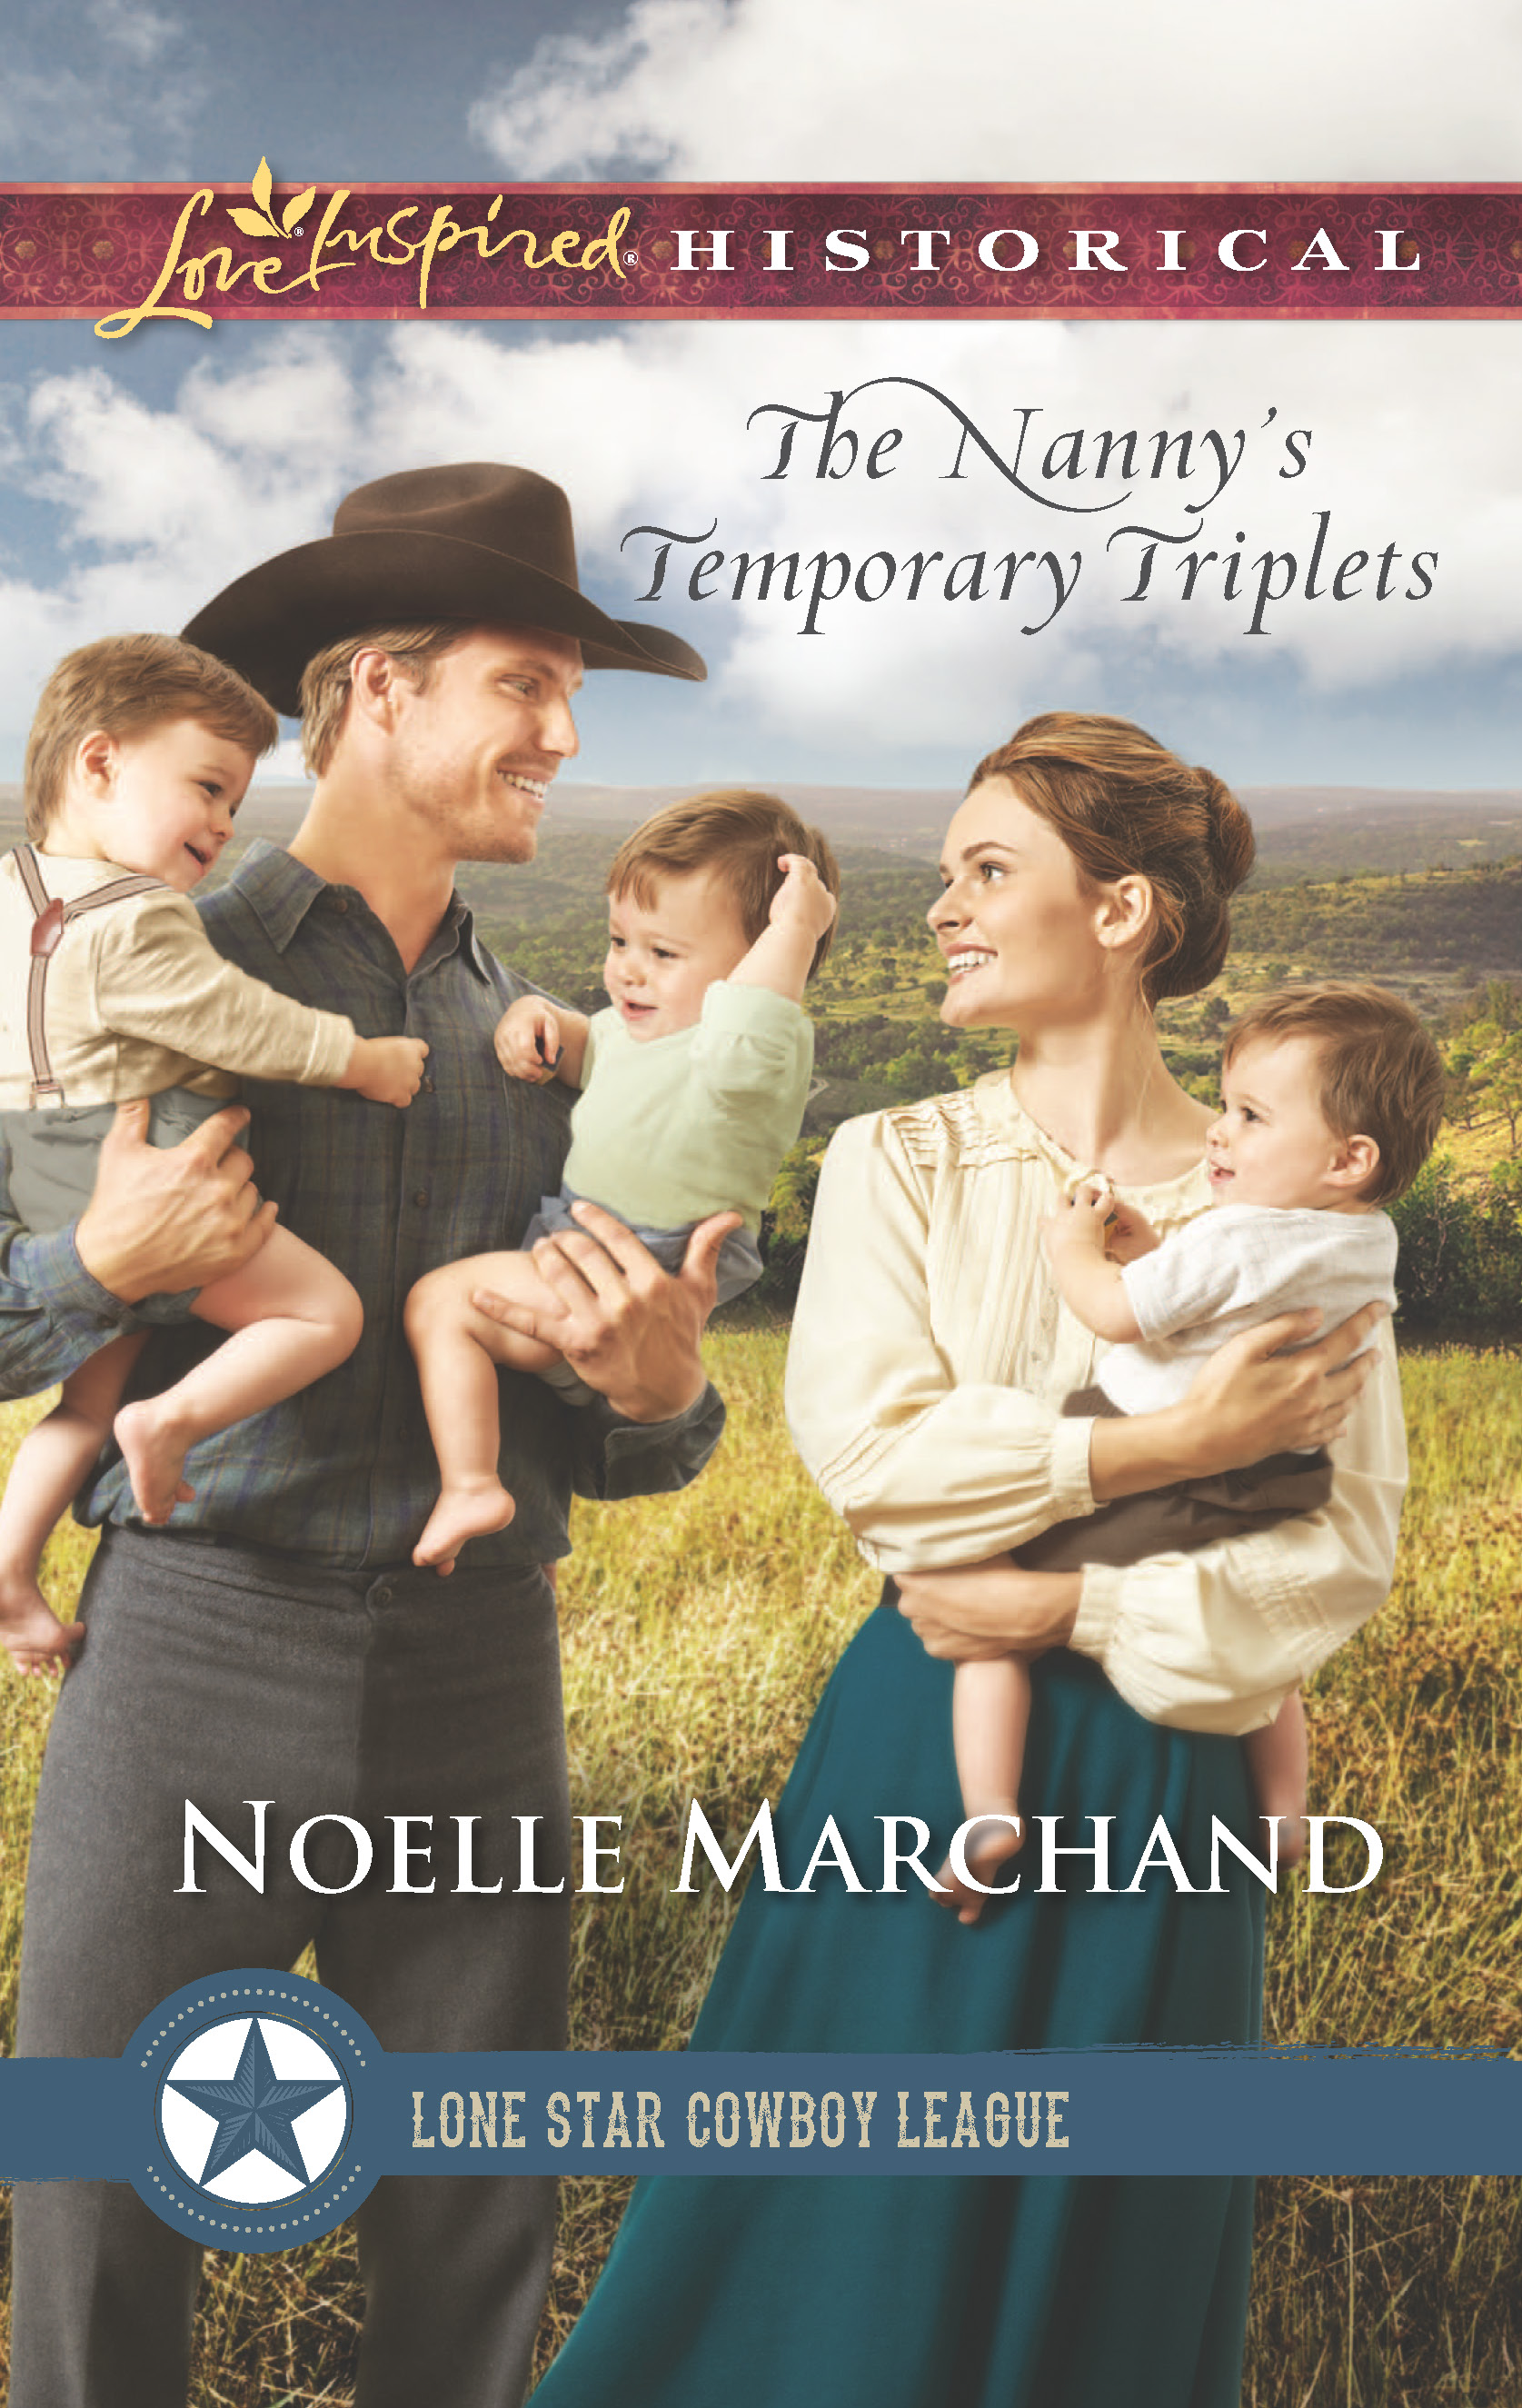 The Nanny's Temporary Triplets by Noelle Marchand, book 3 in the Lone Star Cowboy League: Multiple Blessings series